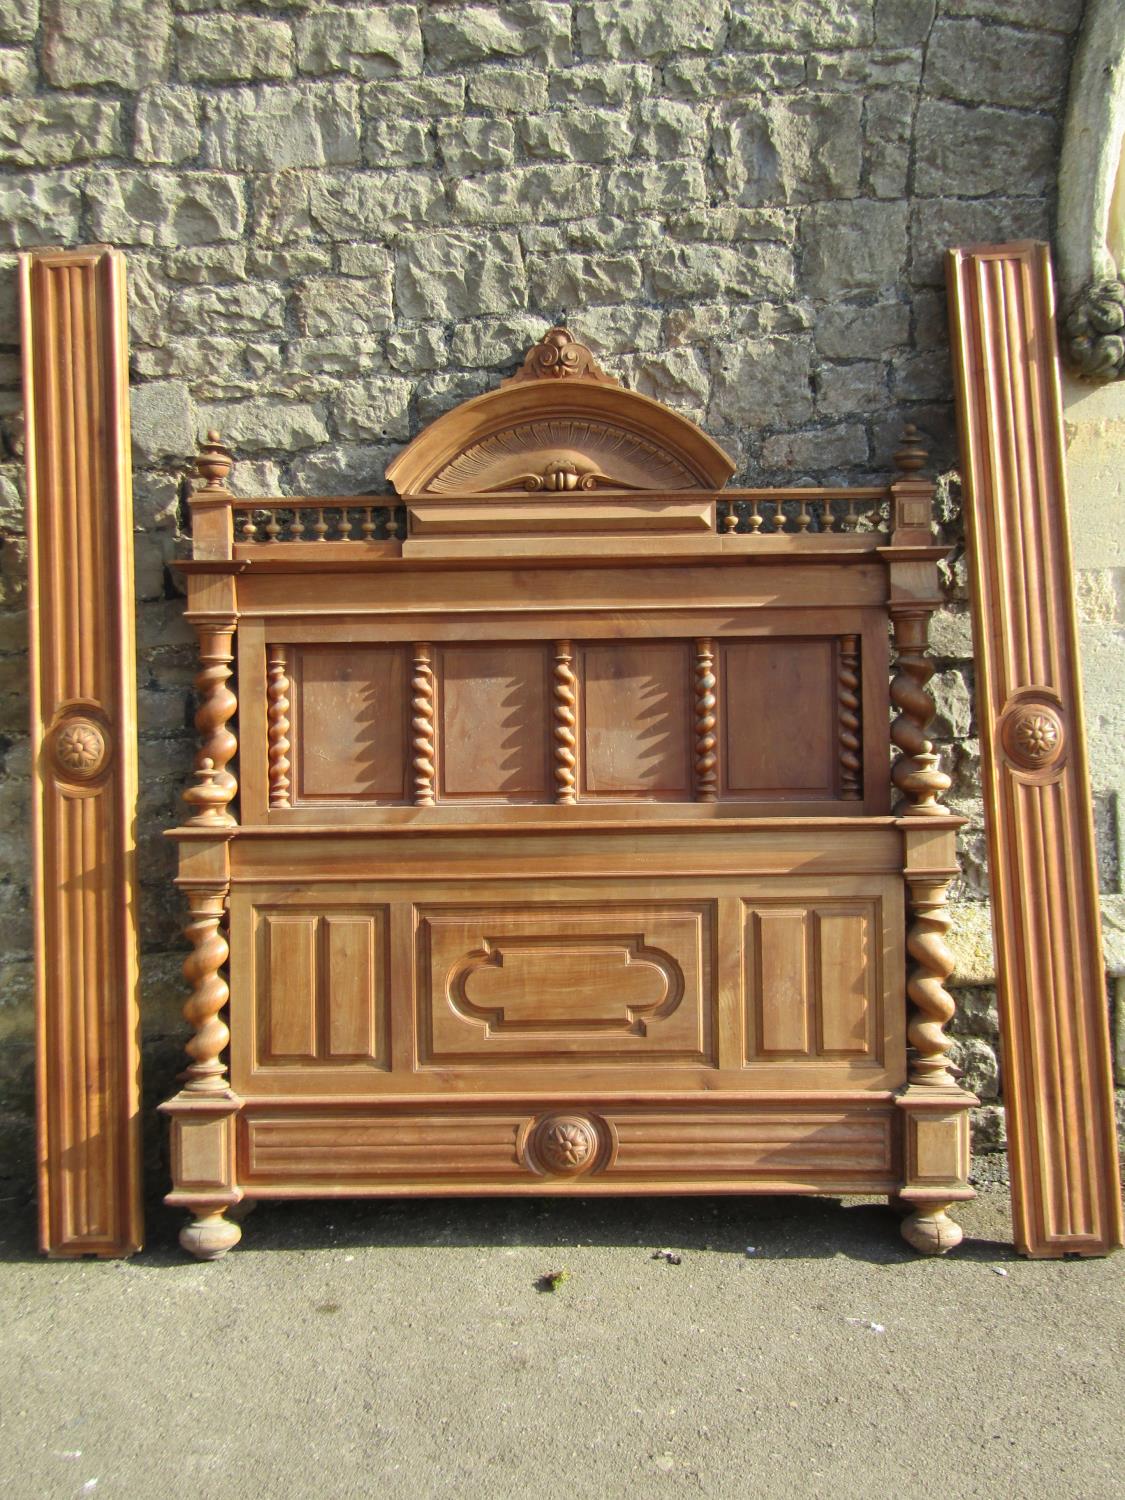 A 19th century continental bedstead in mixed woods, mainly fruitwood and chestnut, the headboard